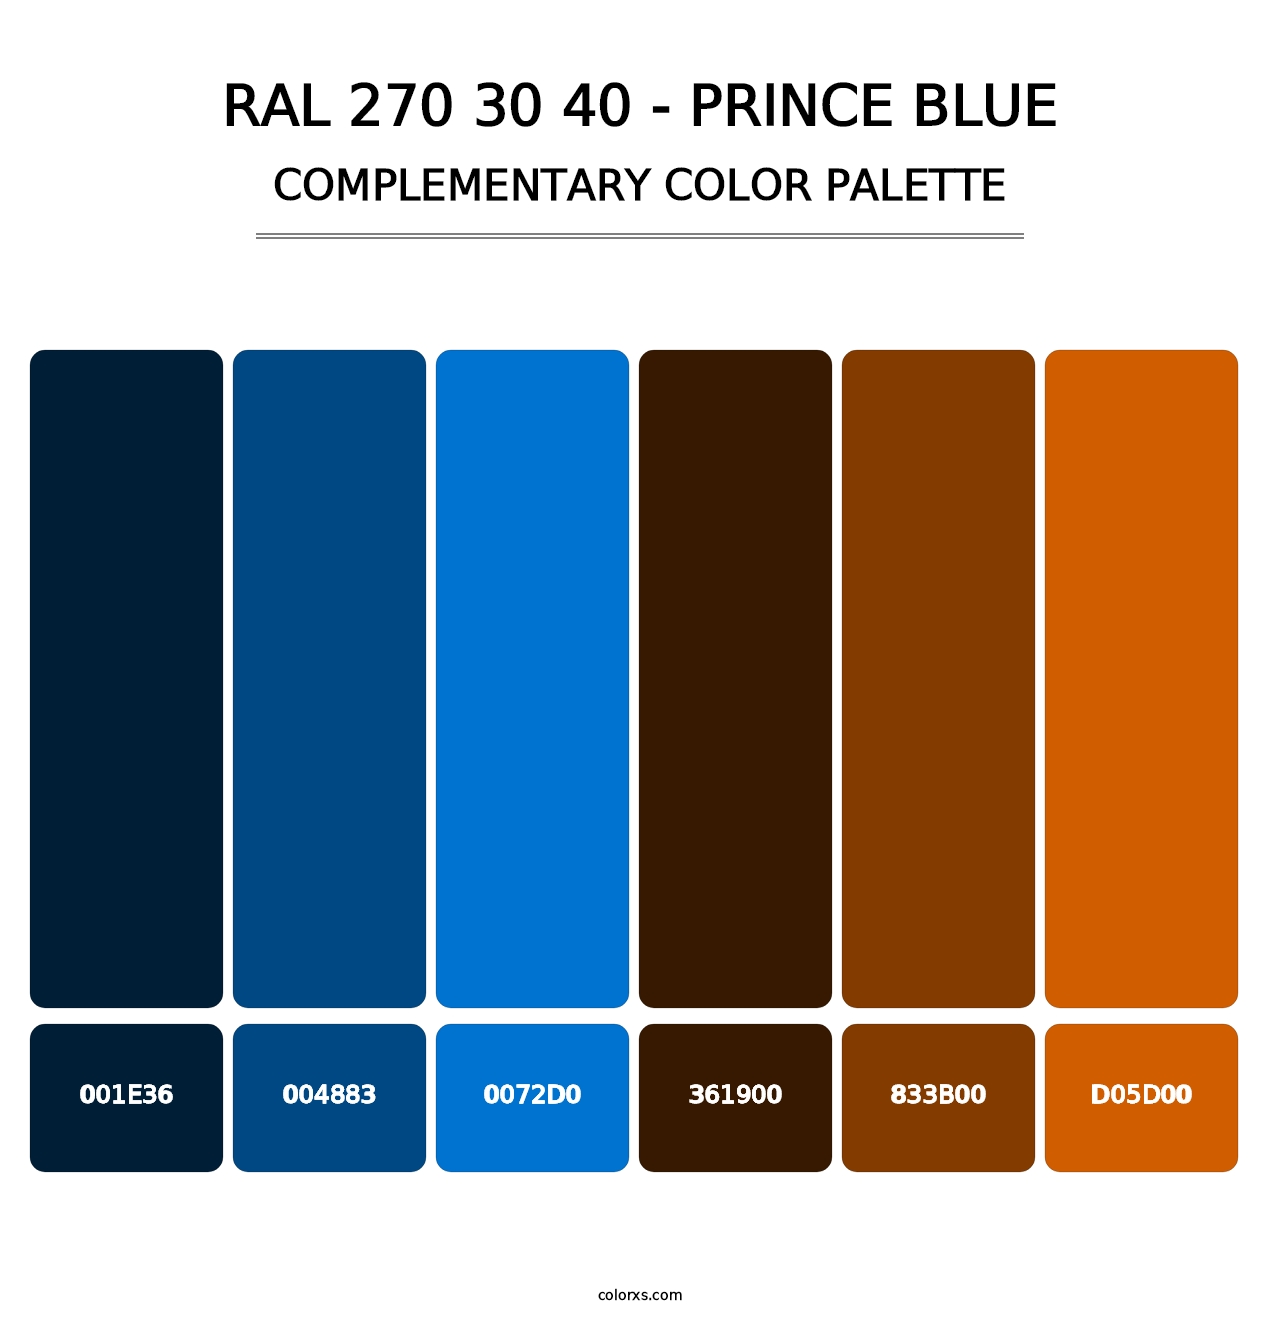 RAL 270 30 40 - Prince Blue - Complementary Color Palette